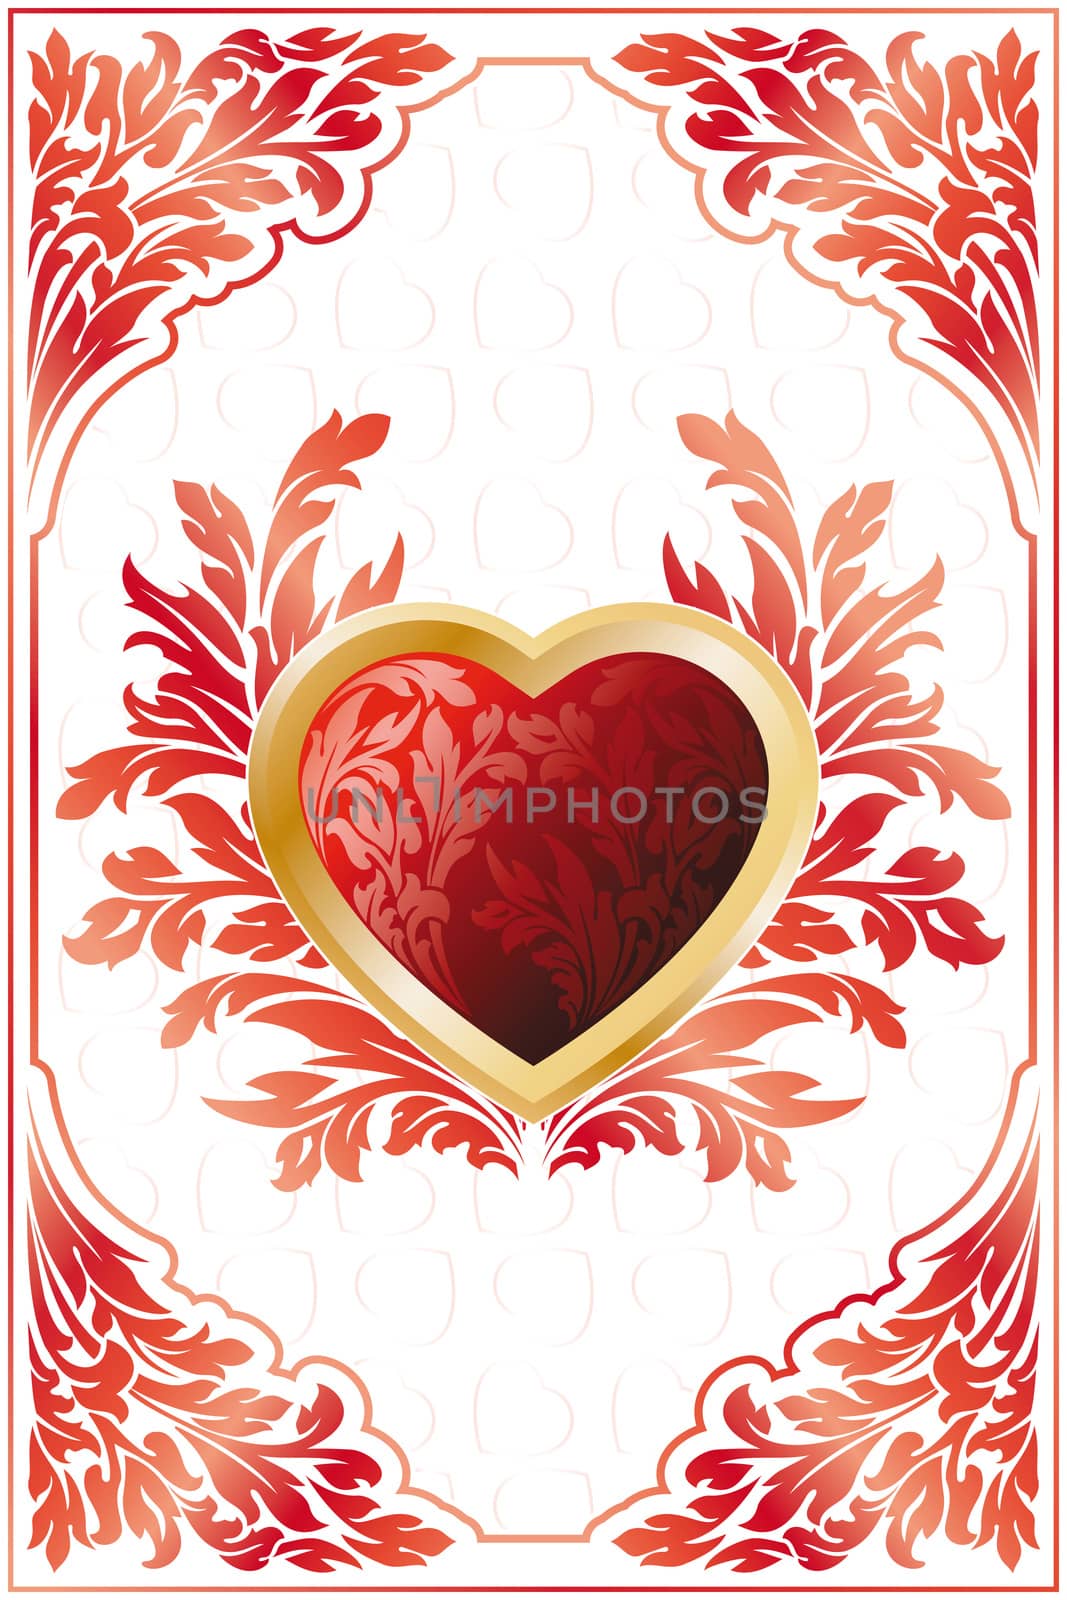 Abstract Stylized Valentines Day card with florals